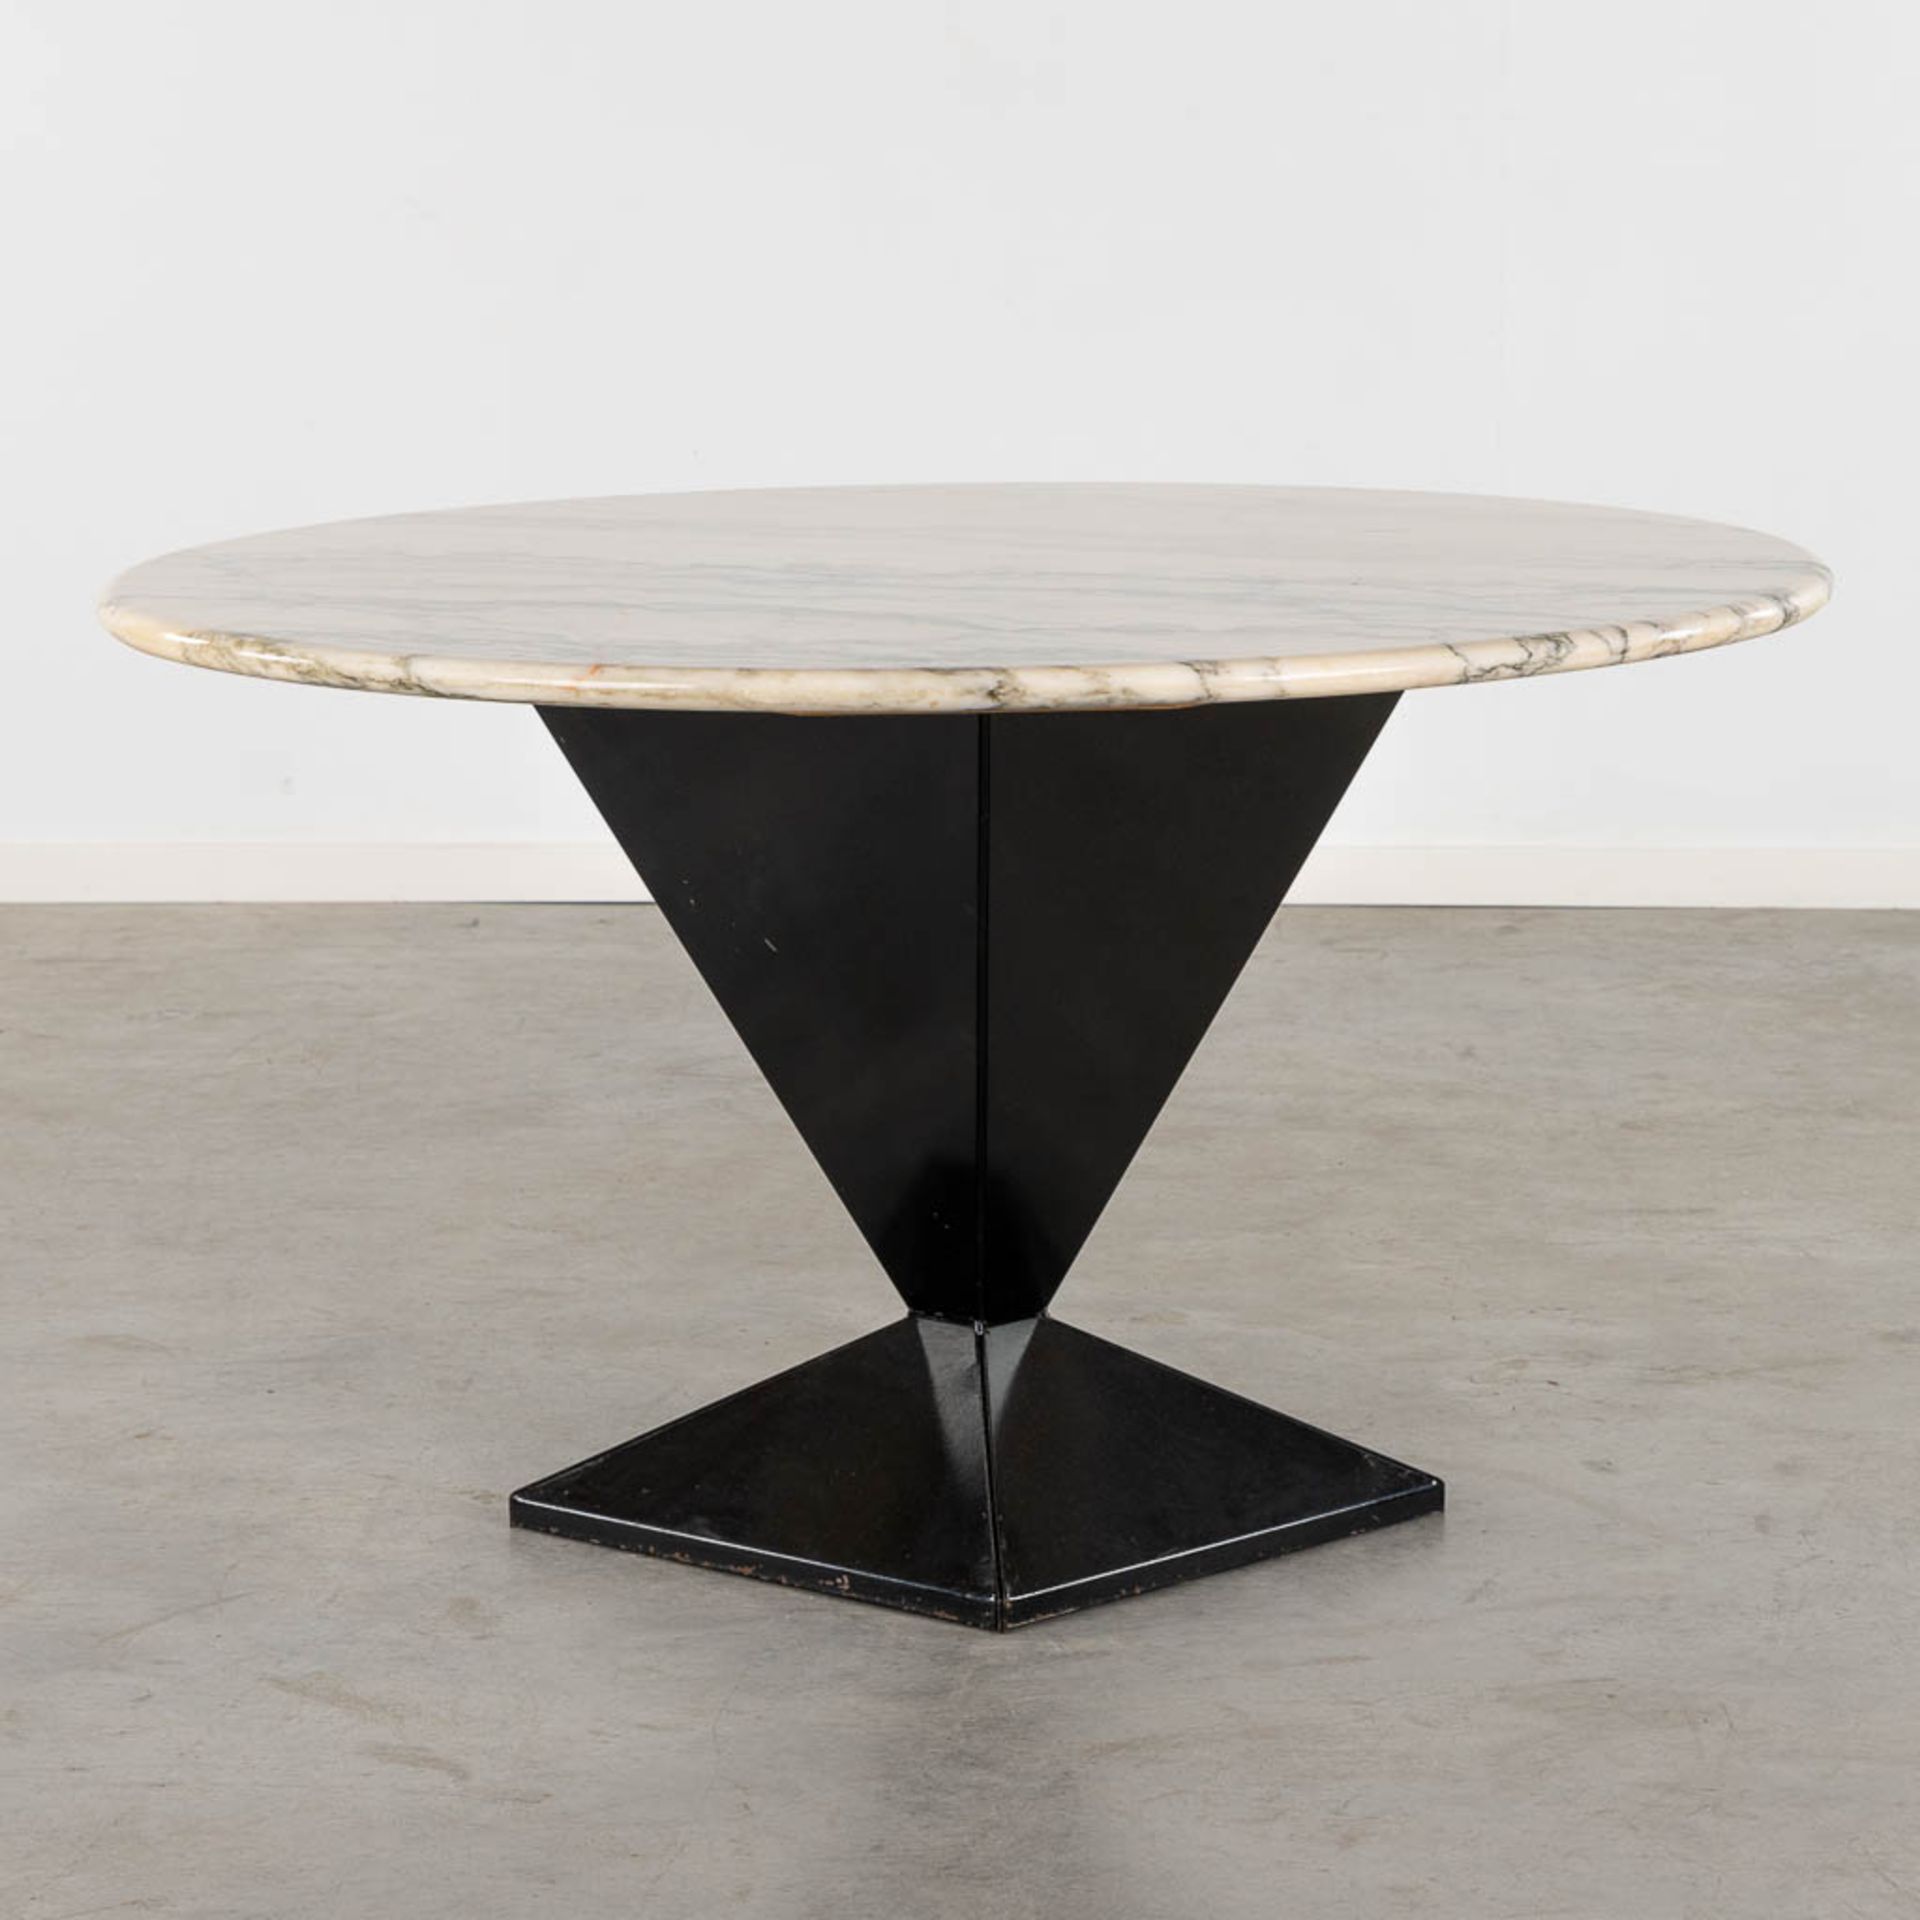 A mid-century table with marble top and a patinated metal base. Circa 1960-1970. (H:73 x D:130 cm)